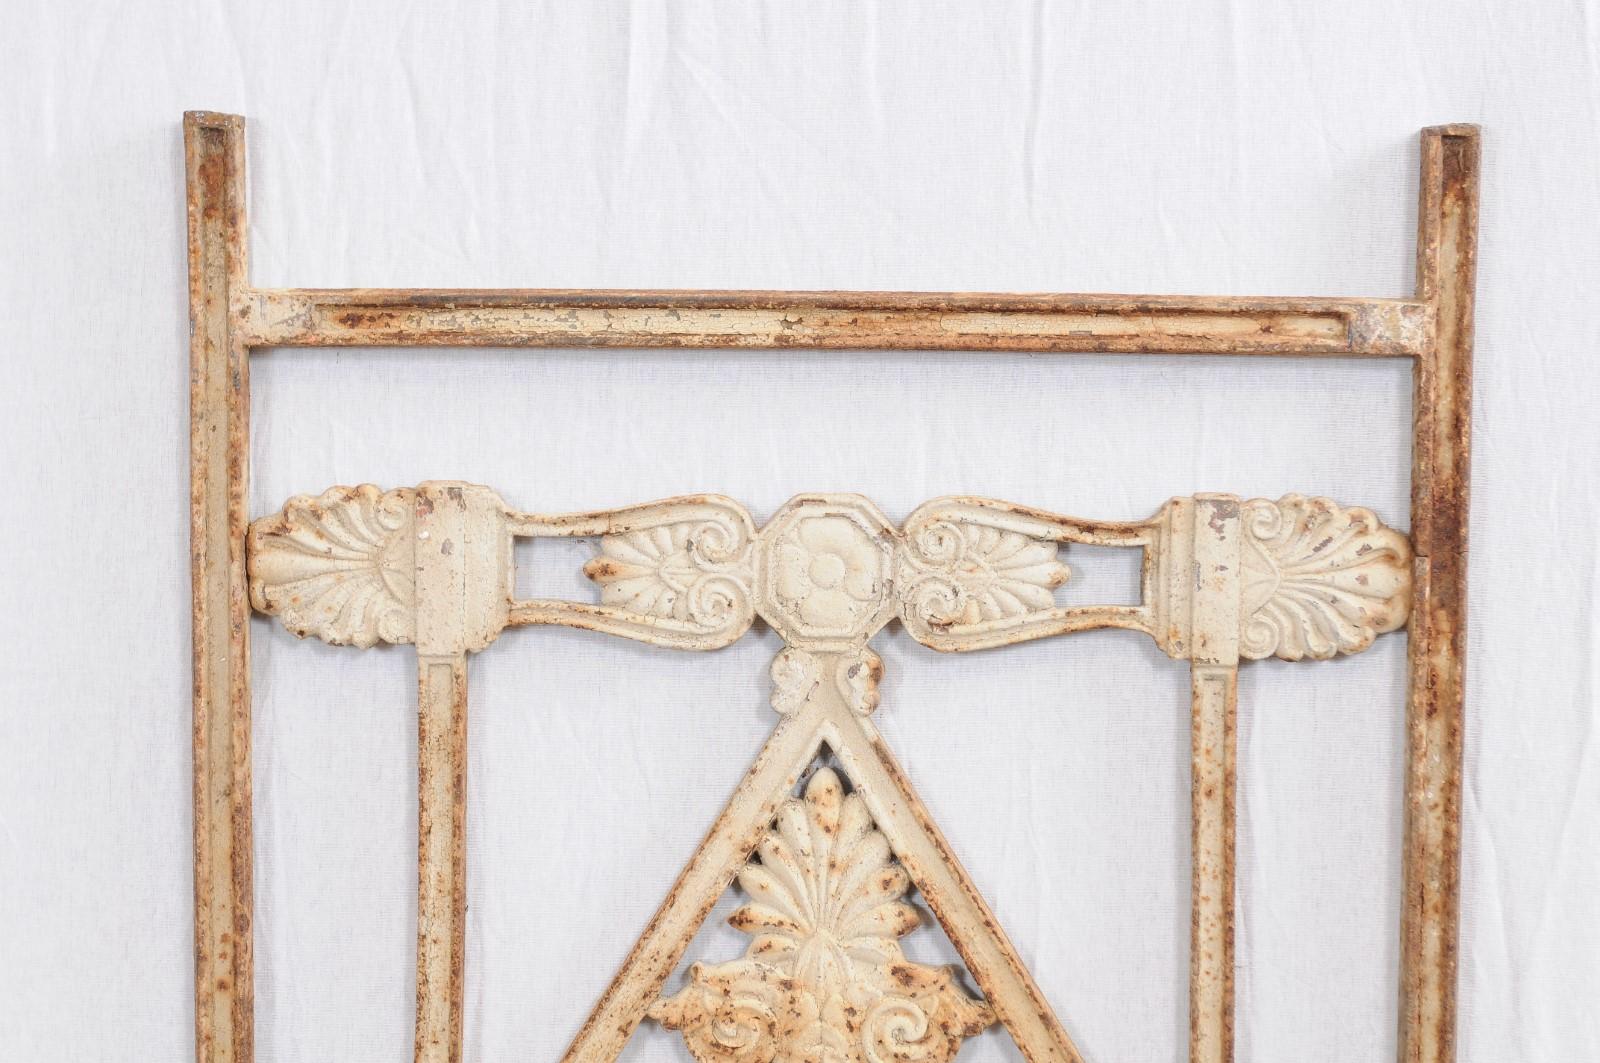 Directoire iron architectural elements in distressed white/cream painted finish, 19th century, France

Dimensions: A) 19